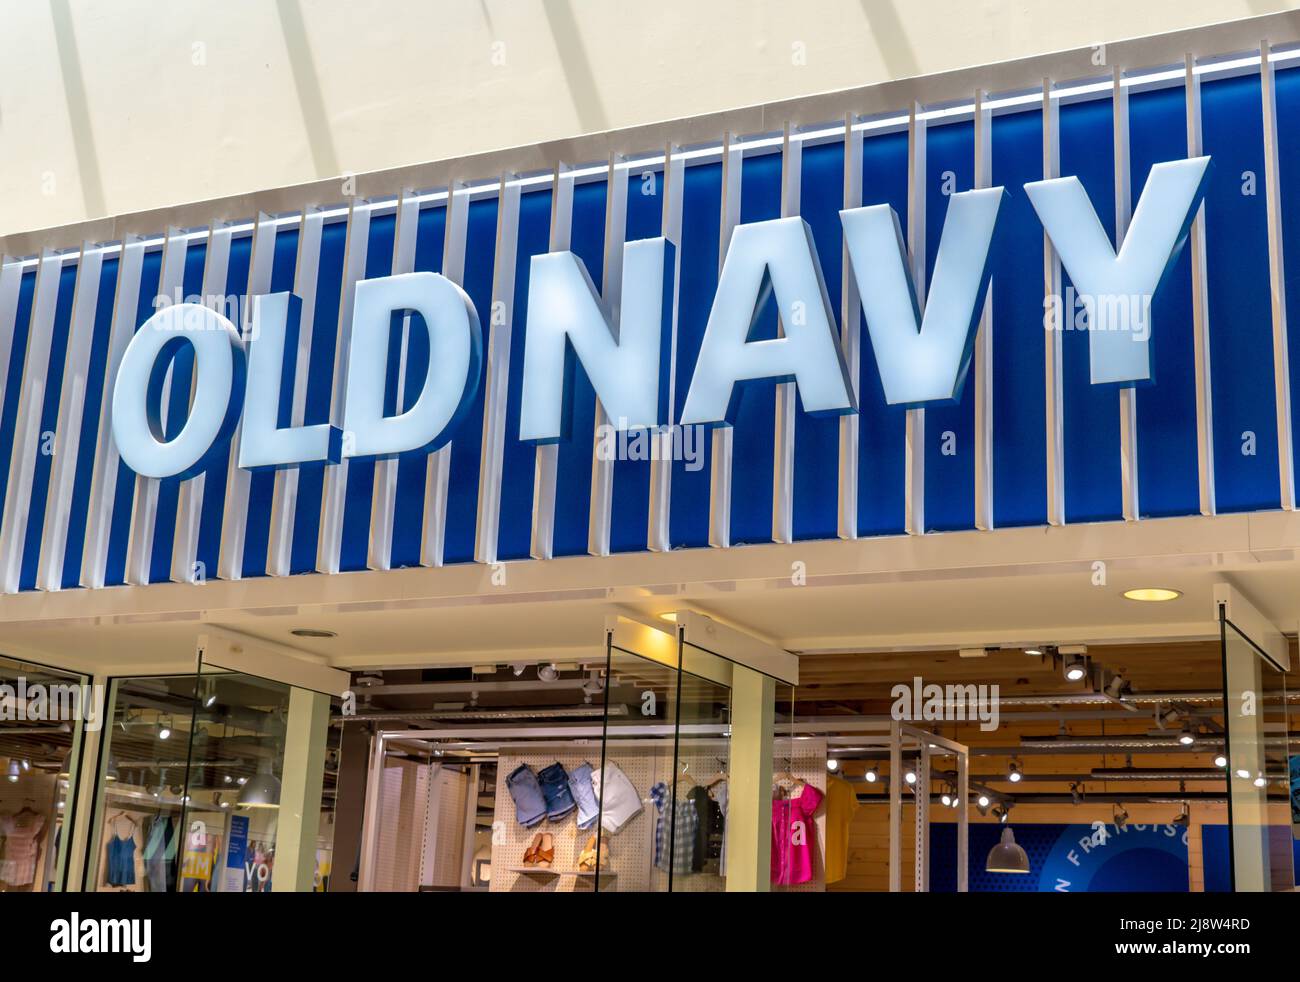 'Old Navy' indoor shopping mall facade brand and logo signage in blue and white above reflective glass windows at Southpark Mall in Charlotte, NC. Stock Photo